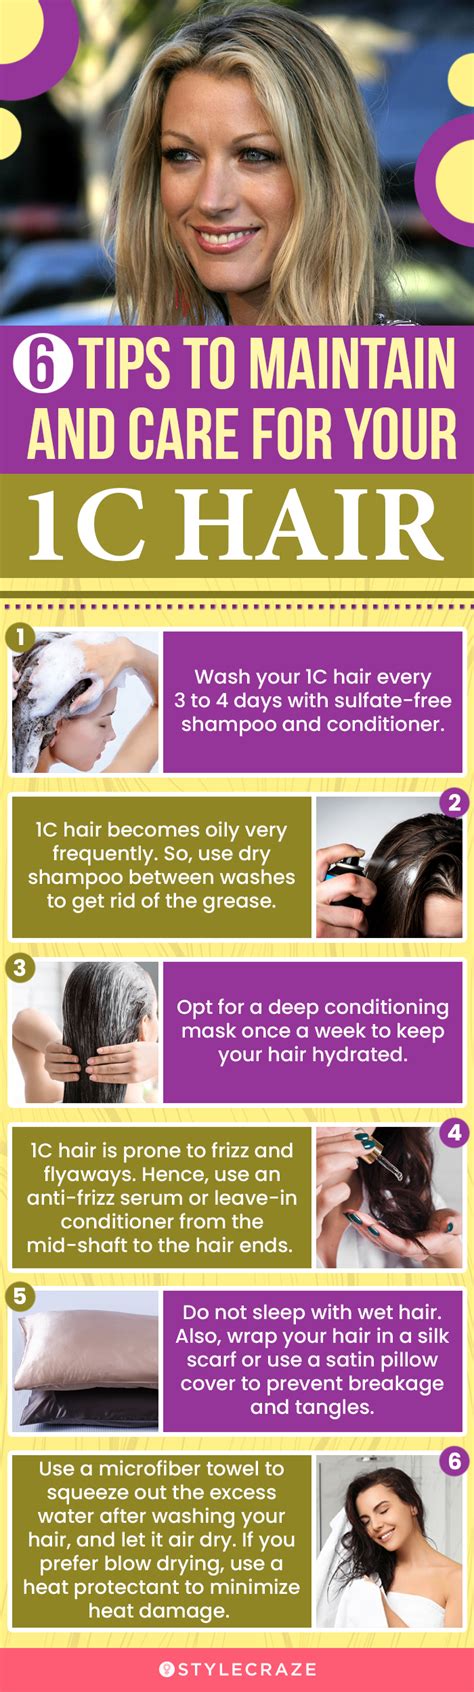 How To Take Care Of 1C Hair